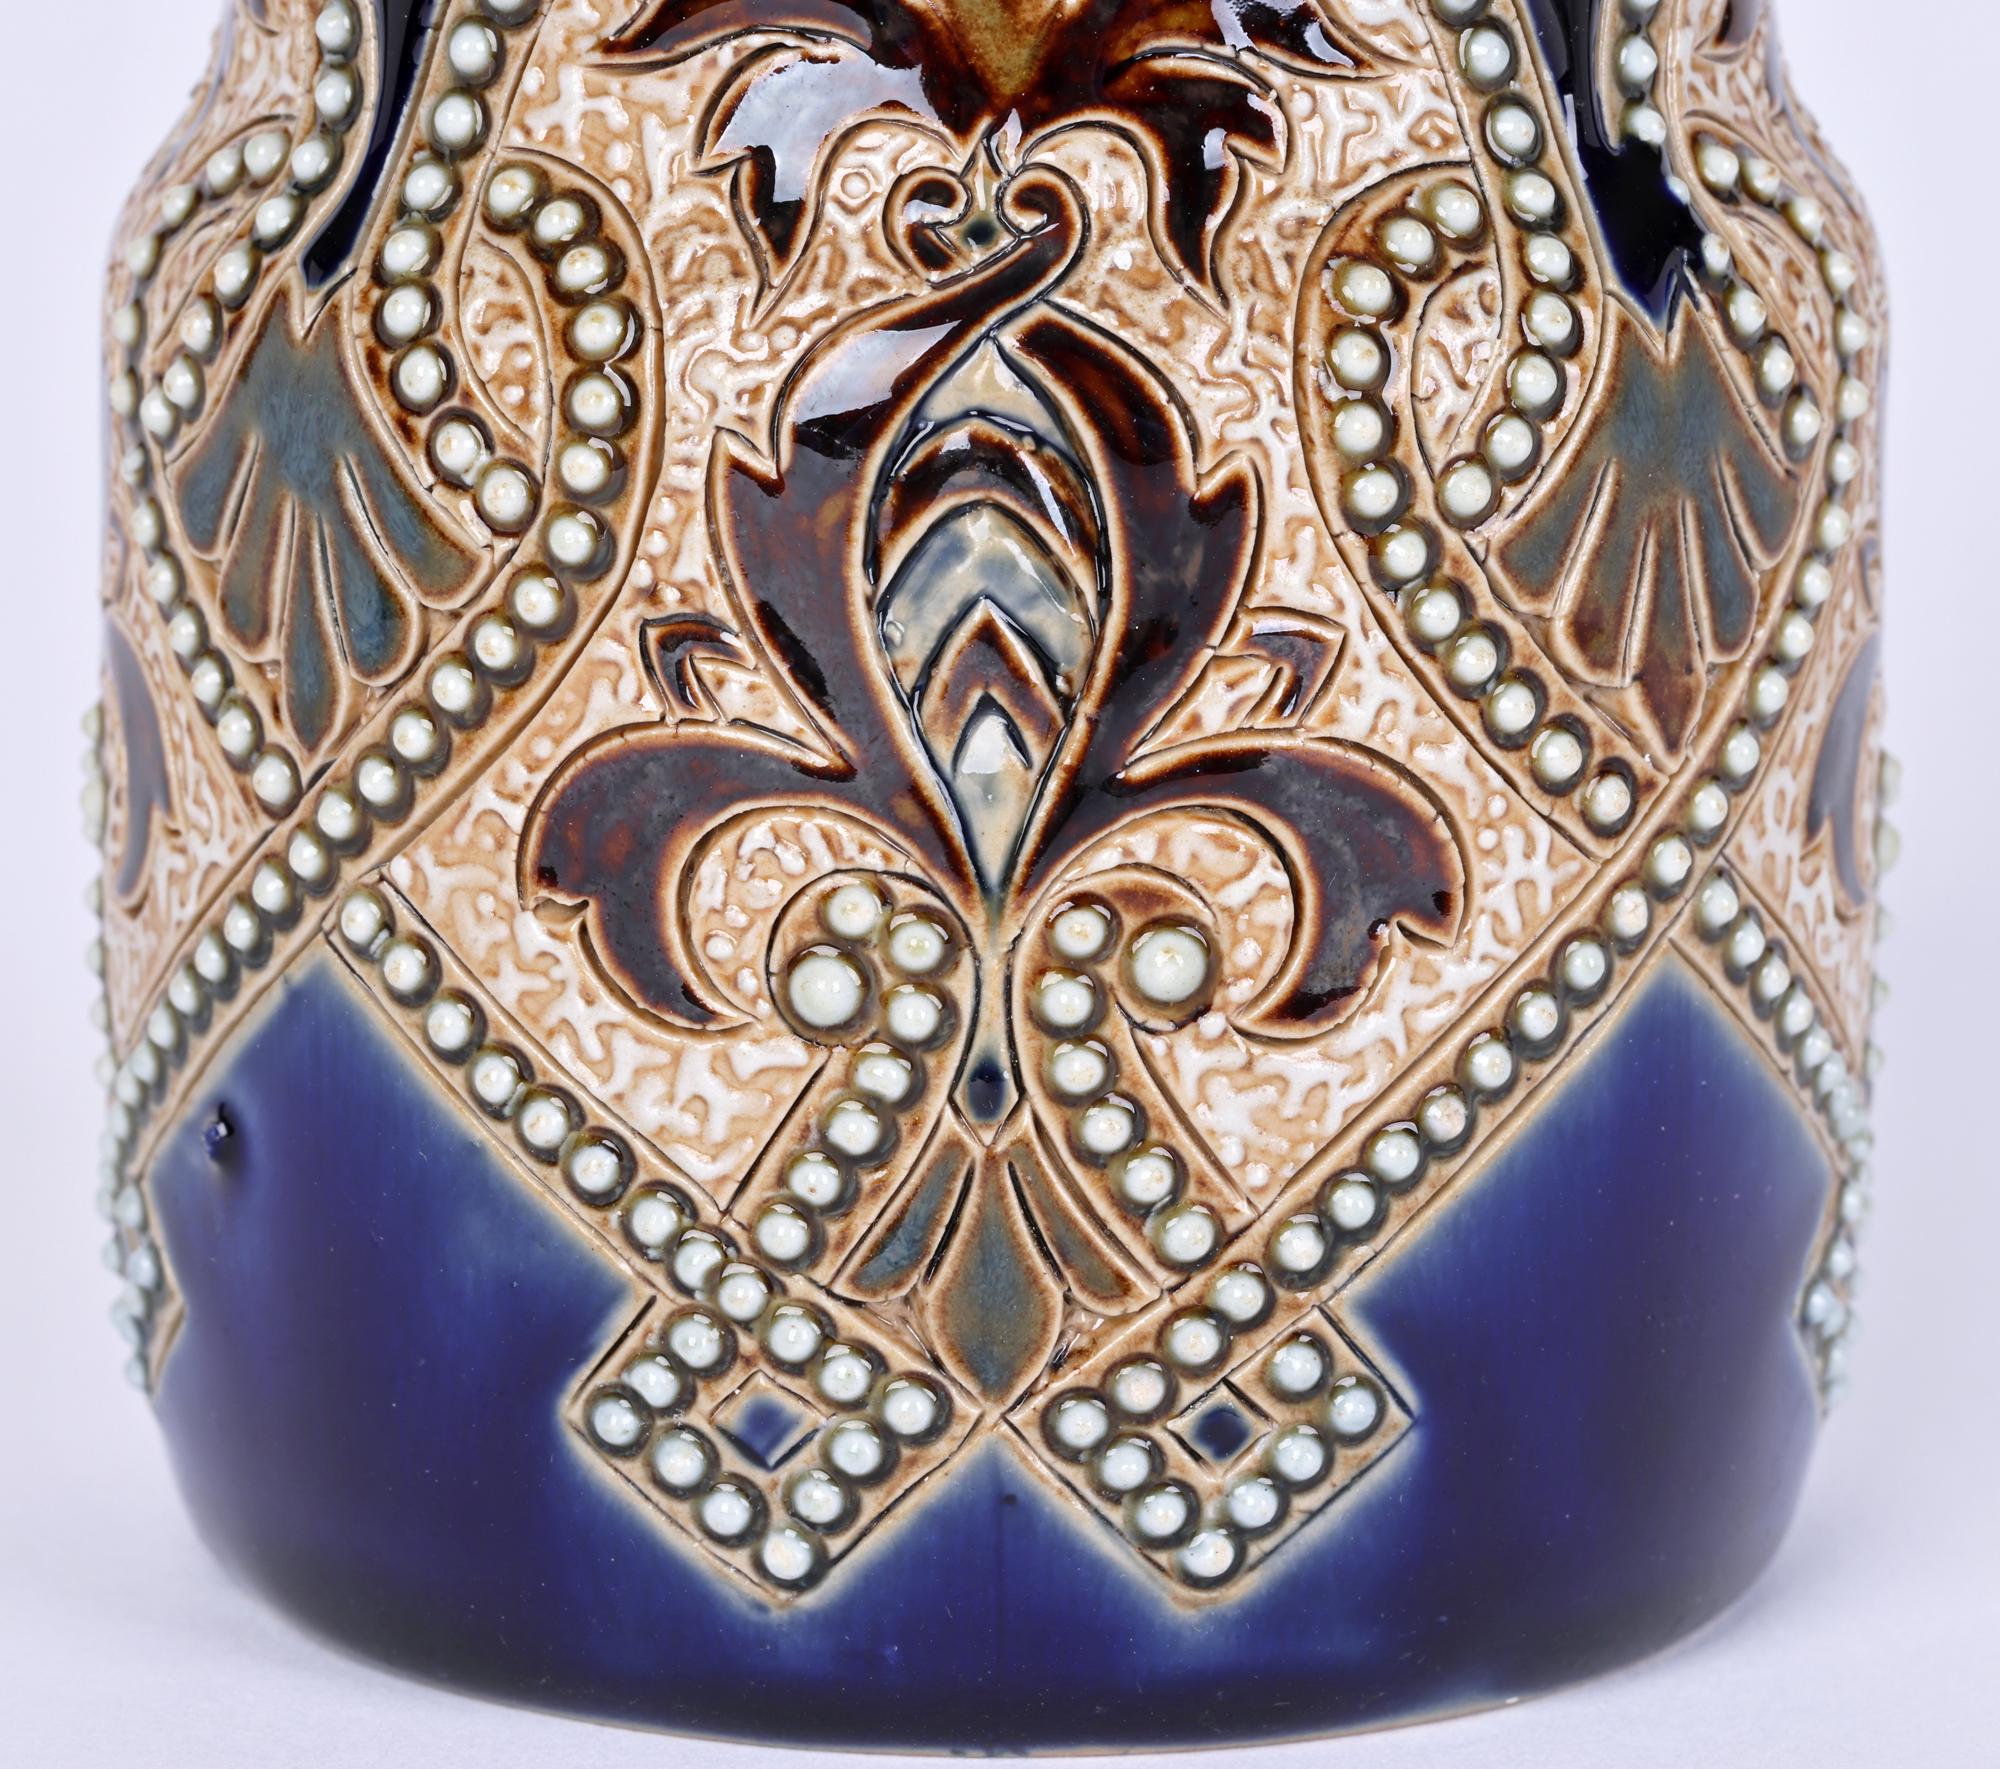 An unusual Doulton Lambeth Aesthetic Movement beaker shaped vase decorated with stylized arabesque and scrolling beaded designs by acclaimed and sought after artist Eliza Simmance and dating from around 1885. The stoneware vase is of cylindrical